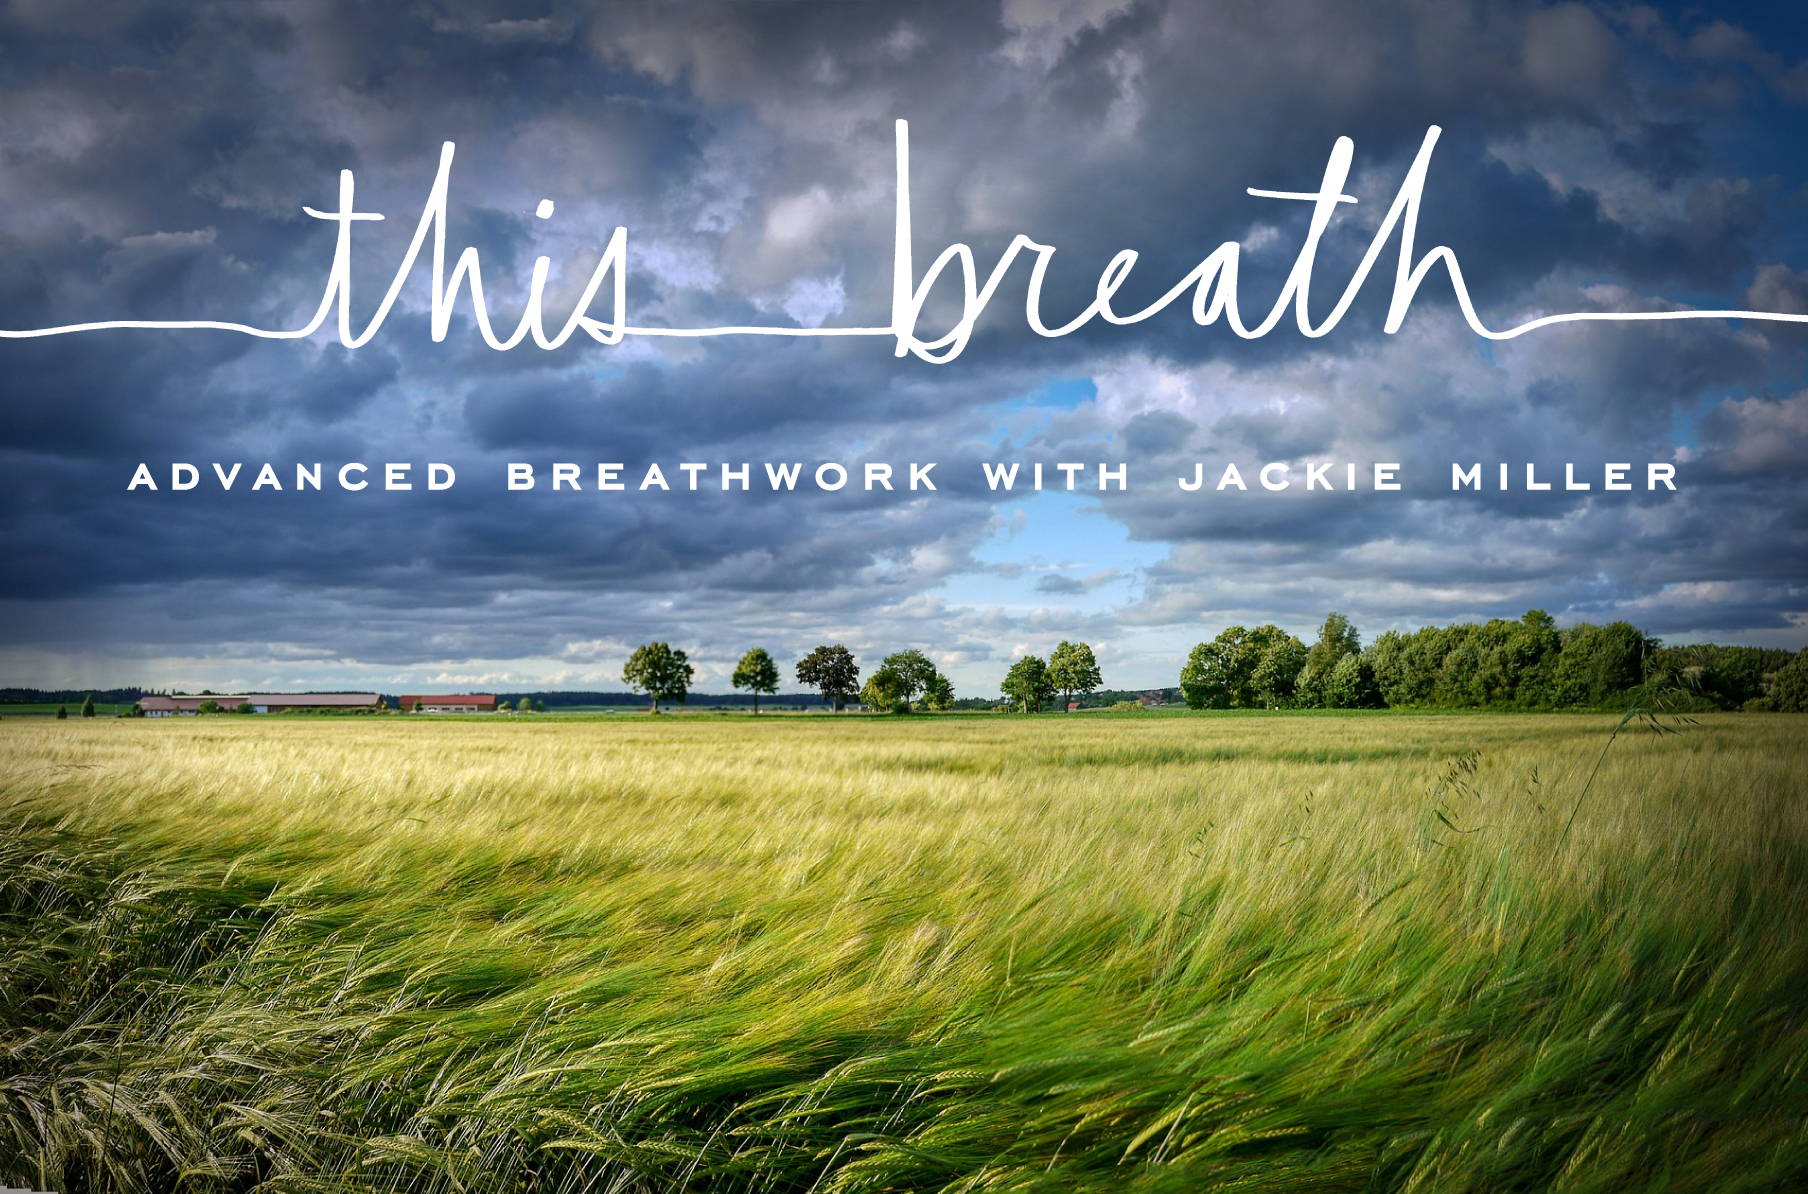 This Breath: Advanced Breathwork with Jackie Miller